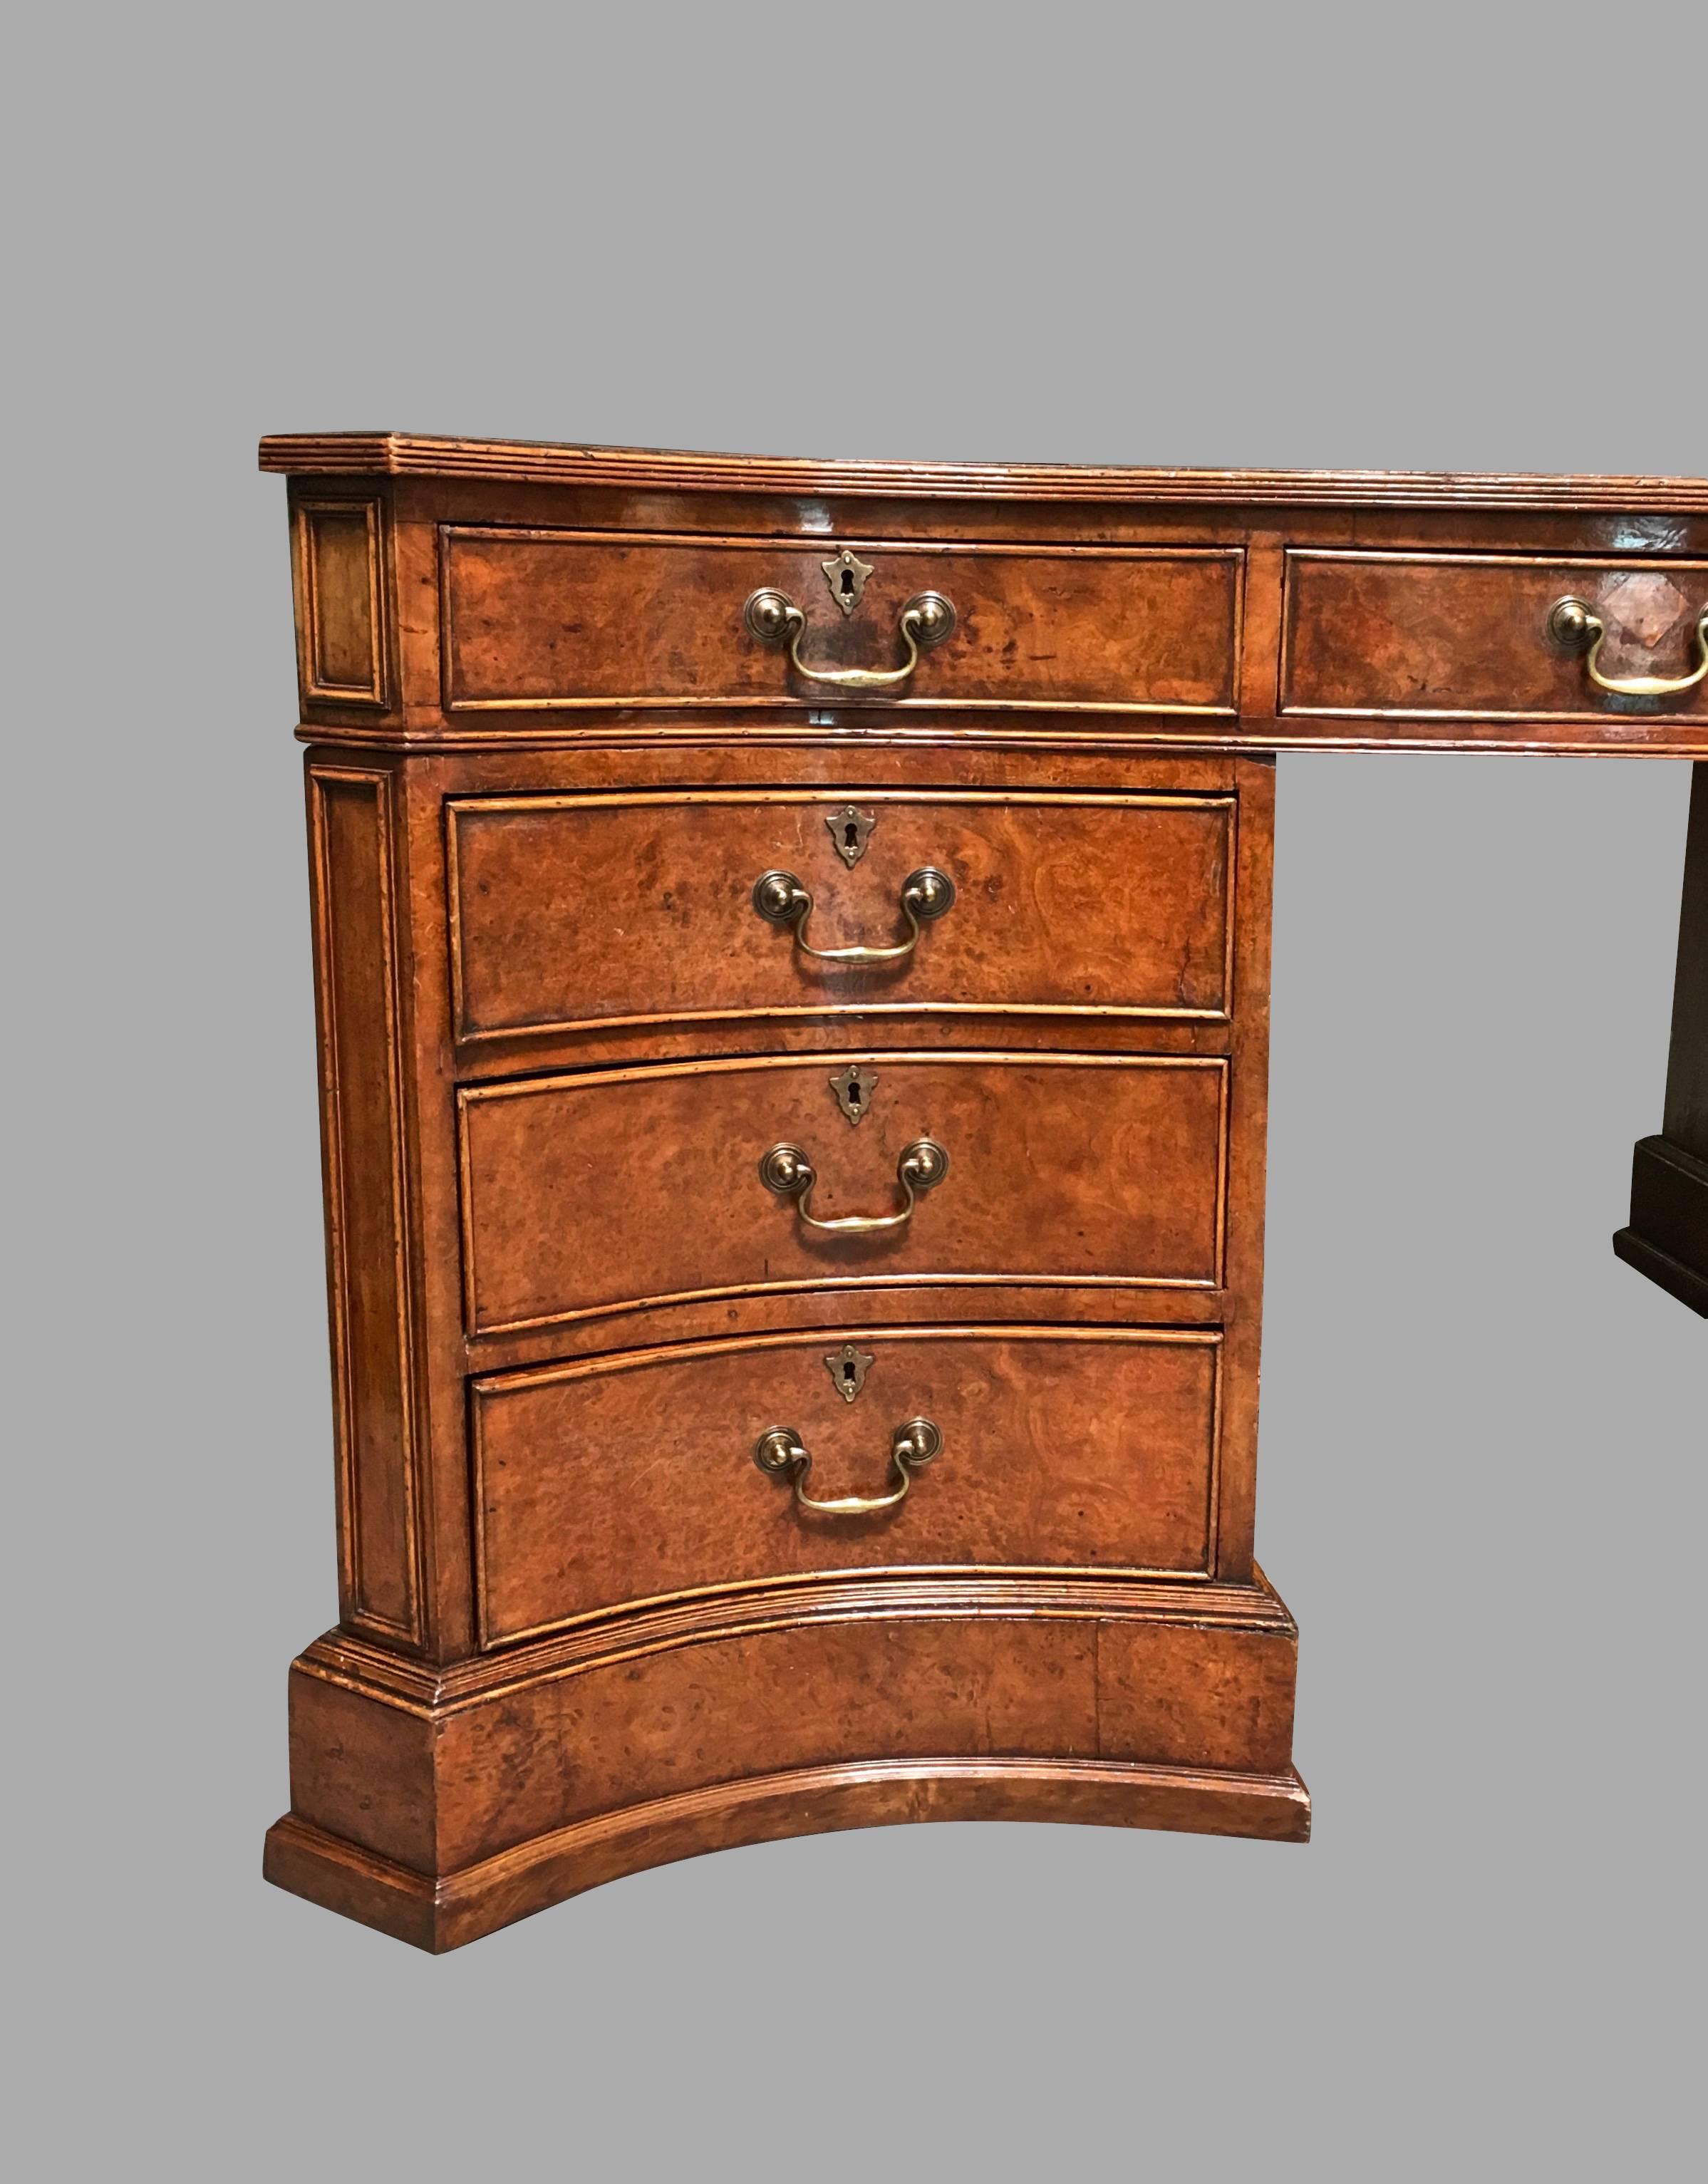 An impressive English Georgian style burl elm serpentine form partners desk of large-scale, the brown gilt-tooled leather top with a molded edge above three frieze drawers, each pedestal with three additional drawers, the reverse with cupboard